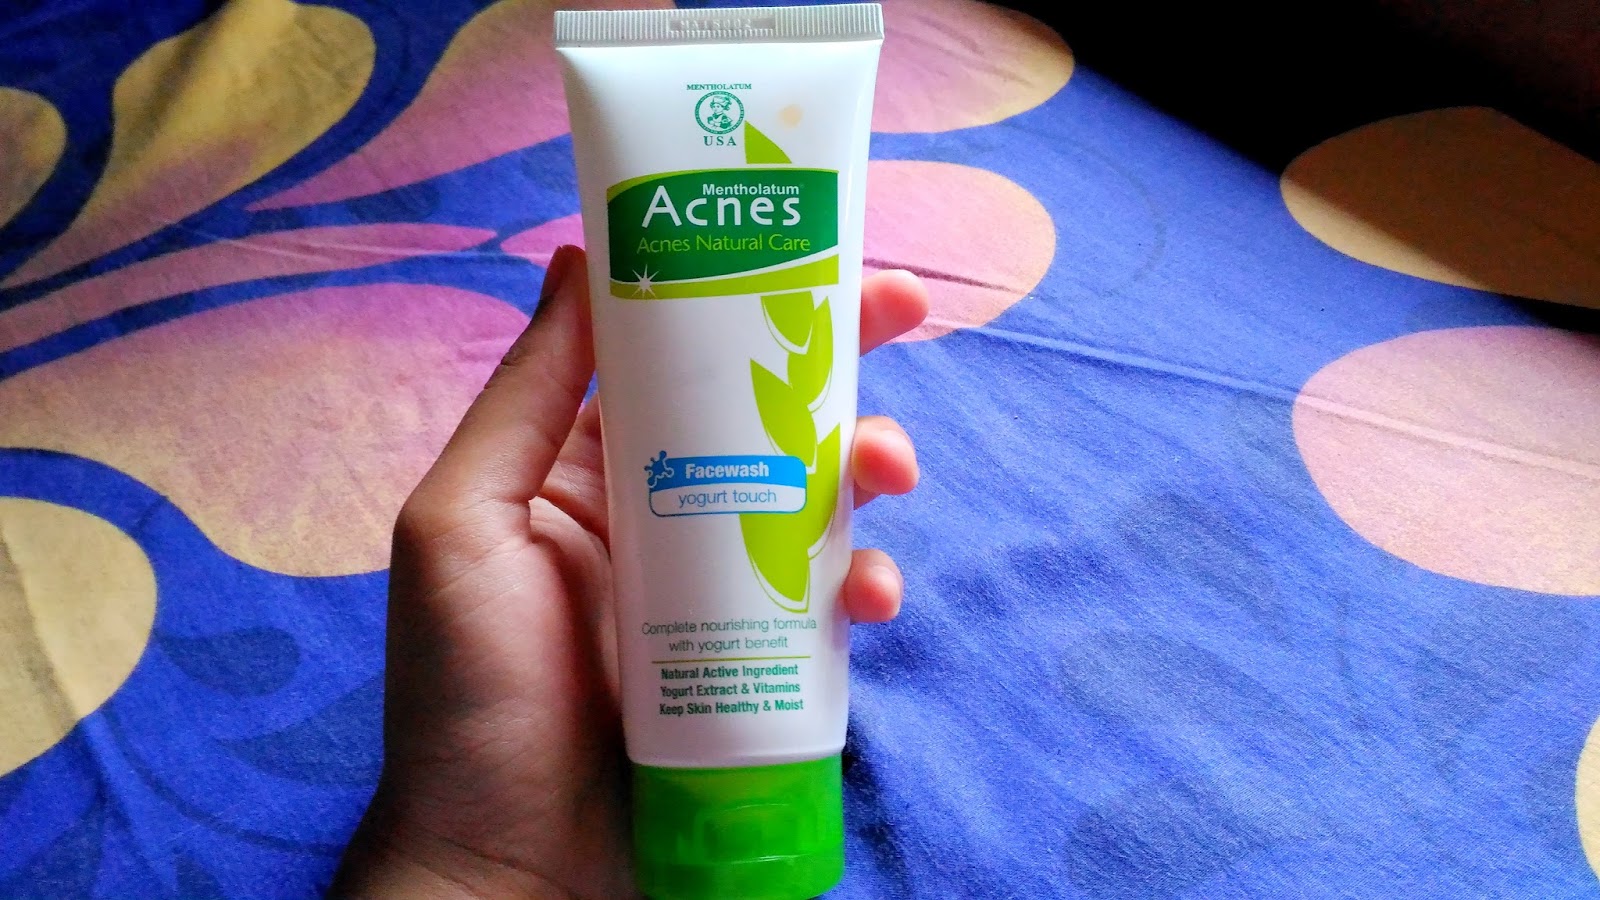 Review Acnes Natural Care Face Wash Yogurt Touch The Yulistinay S Diary